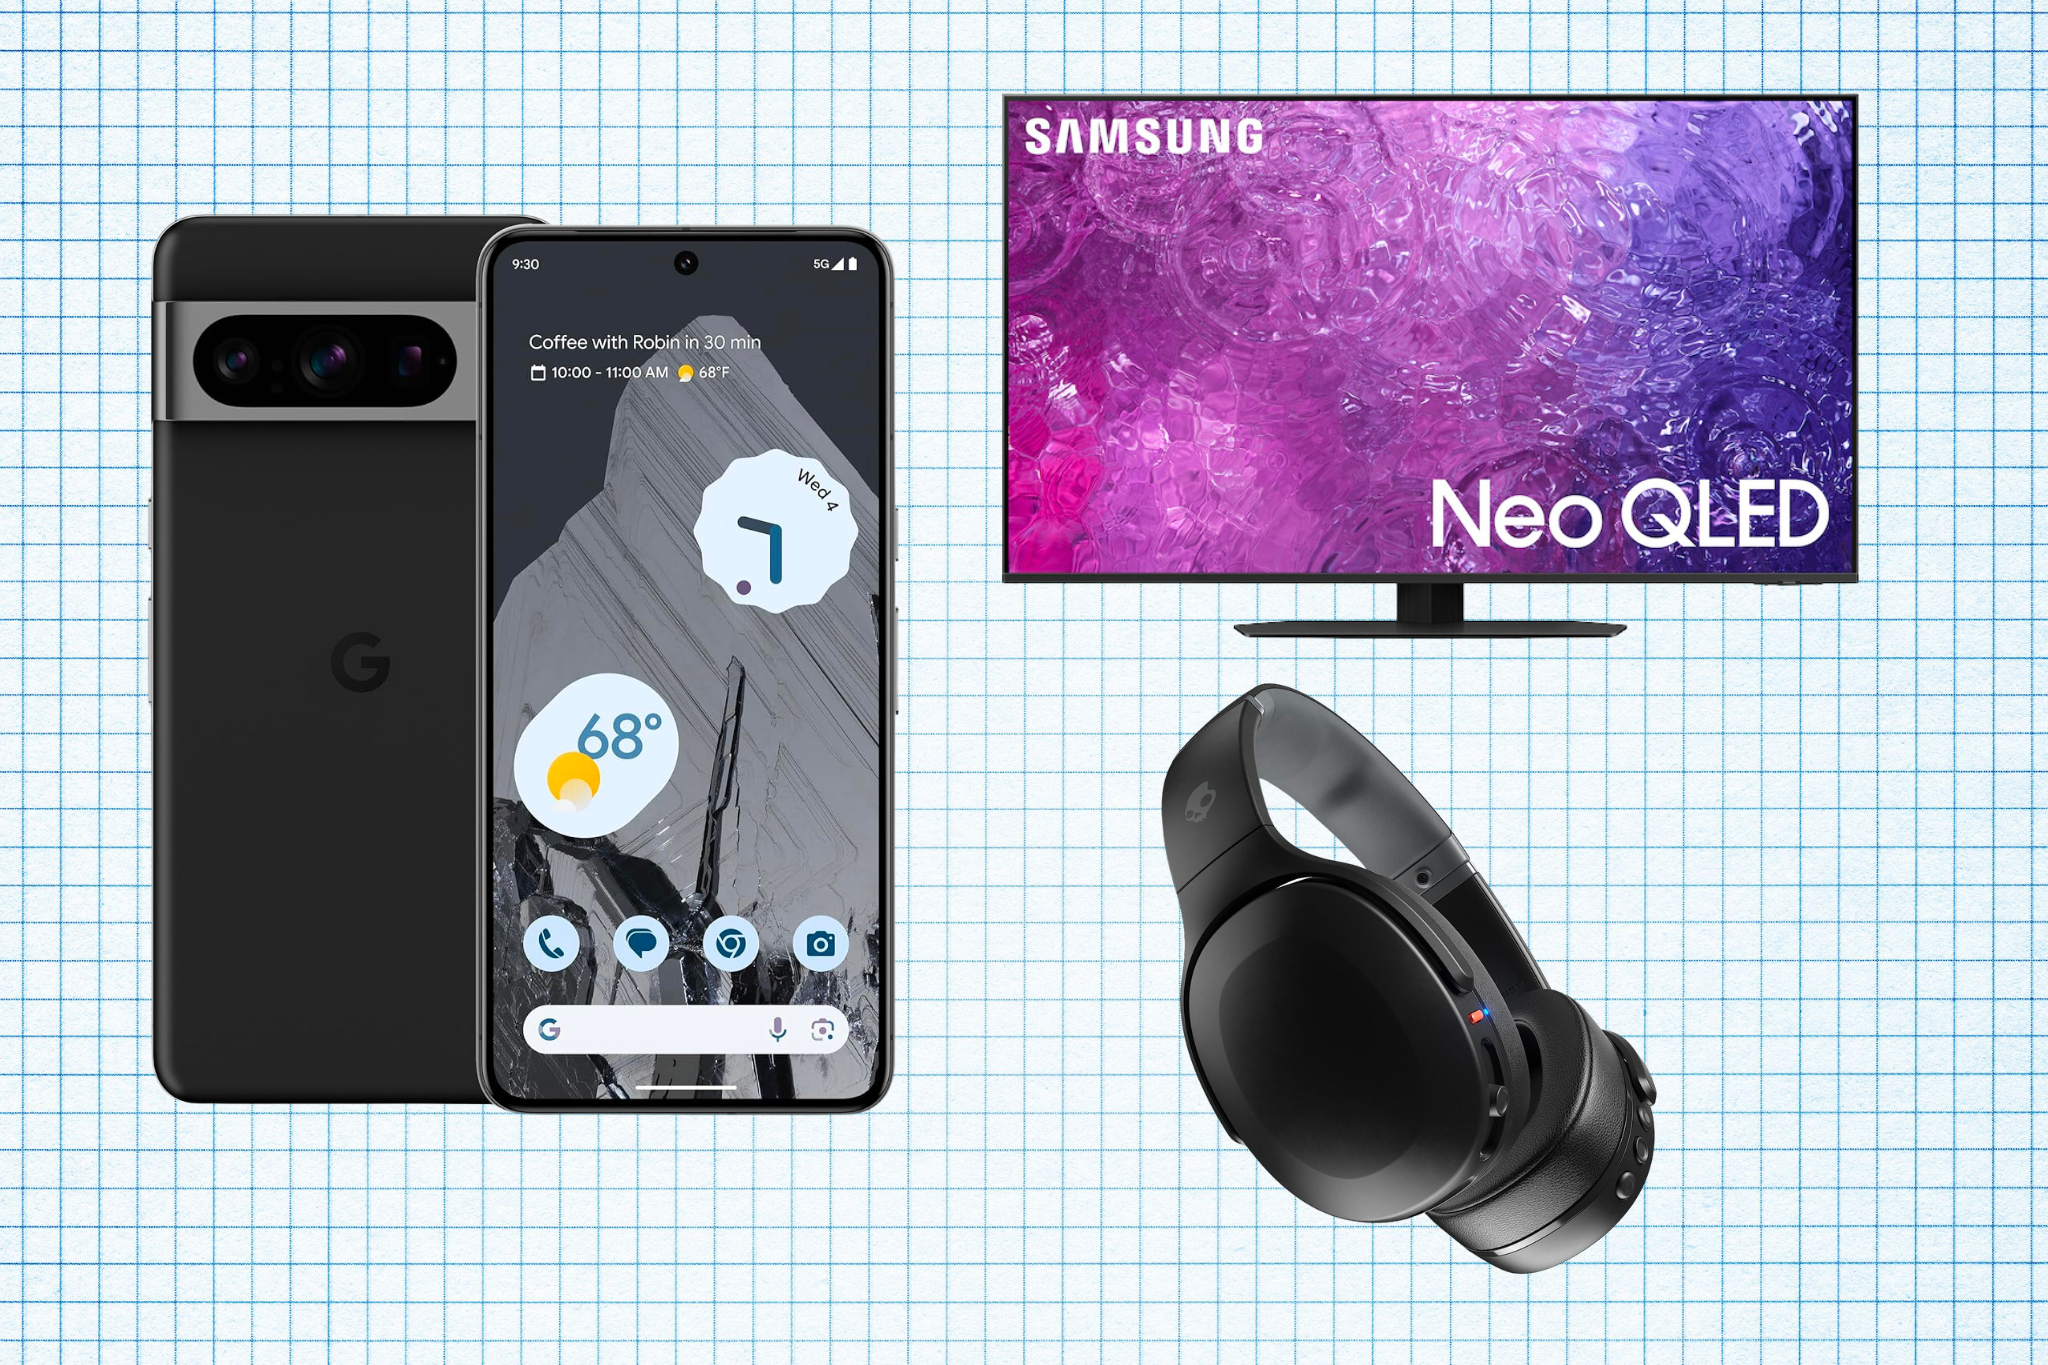 Skullcandy Crusher Evo Over-Ear Wireless Headphones, 50" Class Samsung Neo QLED 4K TV, and Google Pixel 8 Pro Unlocked Android Smartphone isolated on a blue grid paper background.